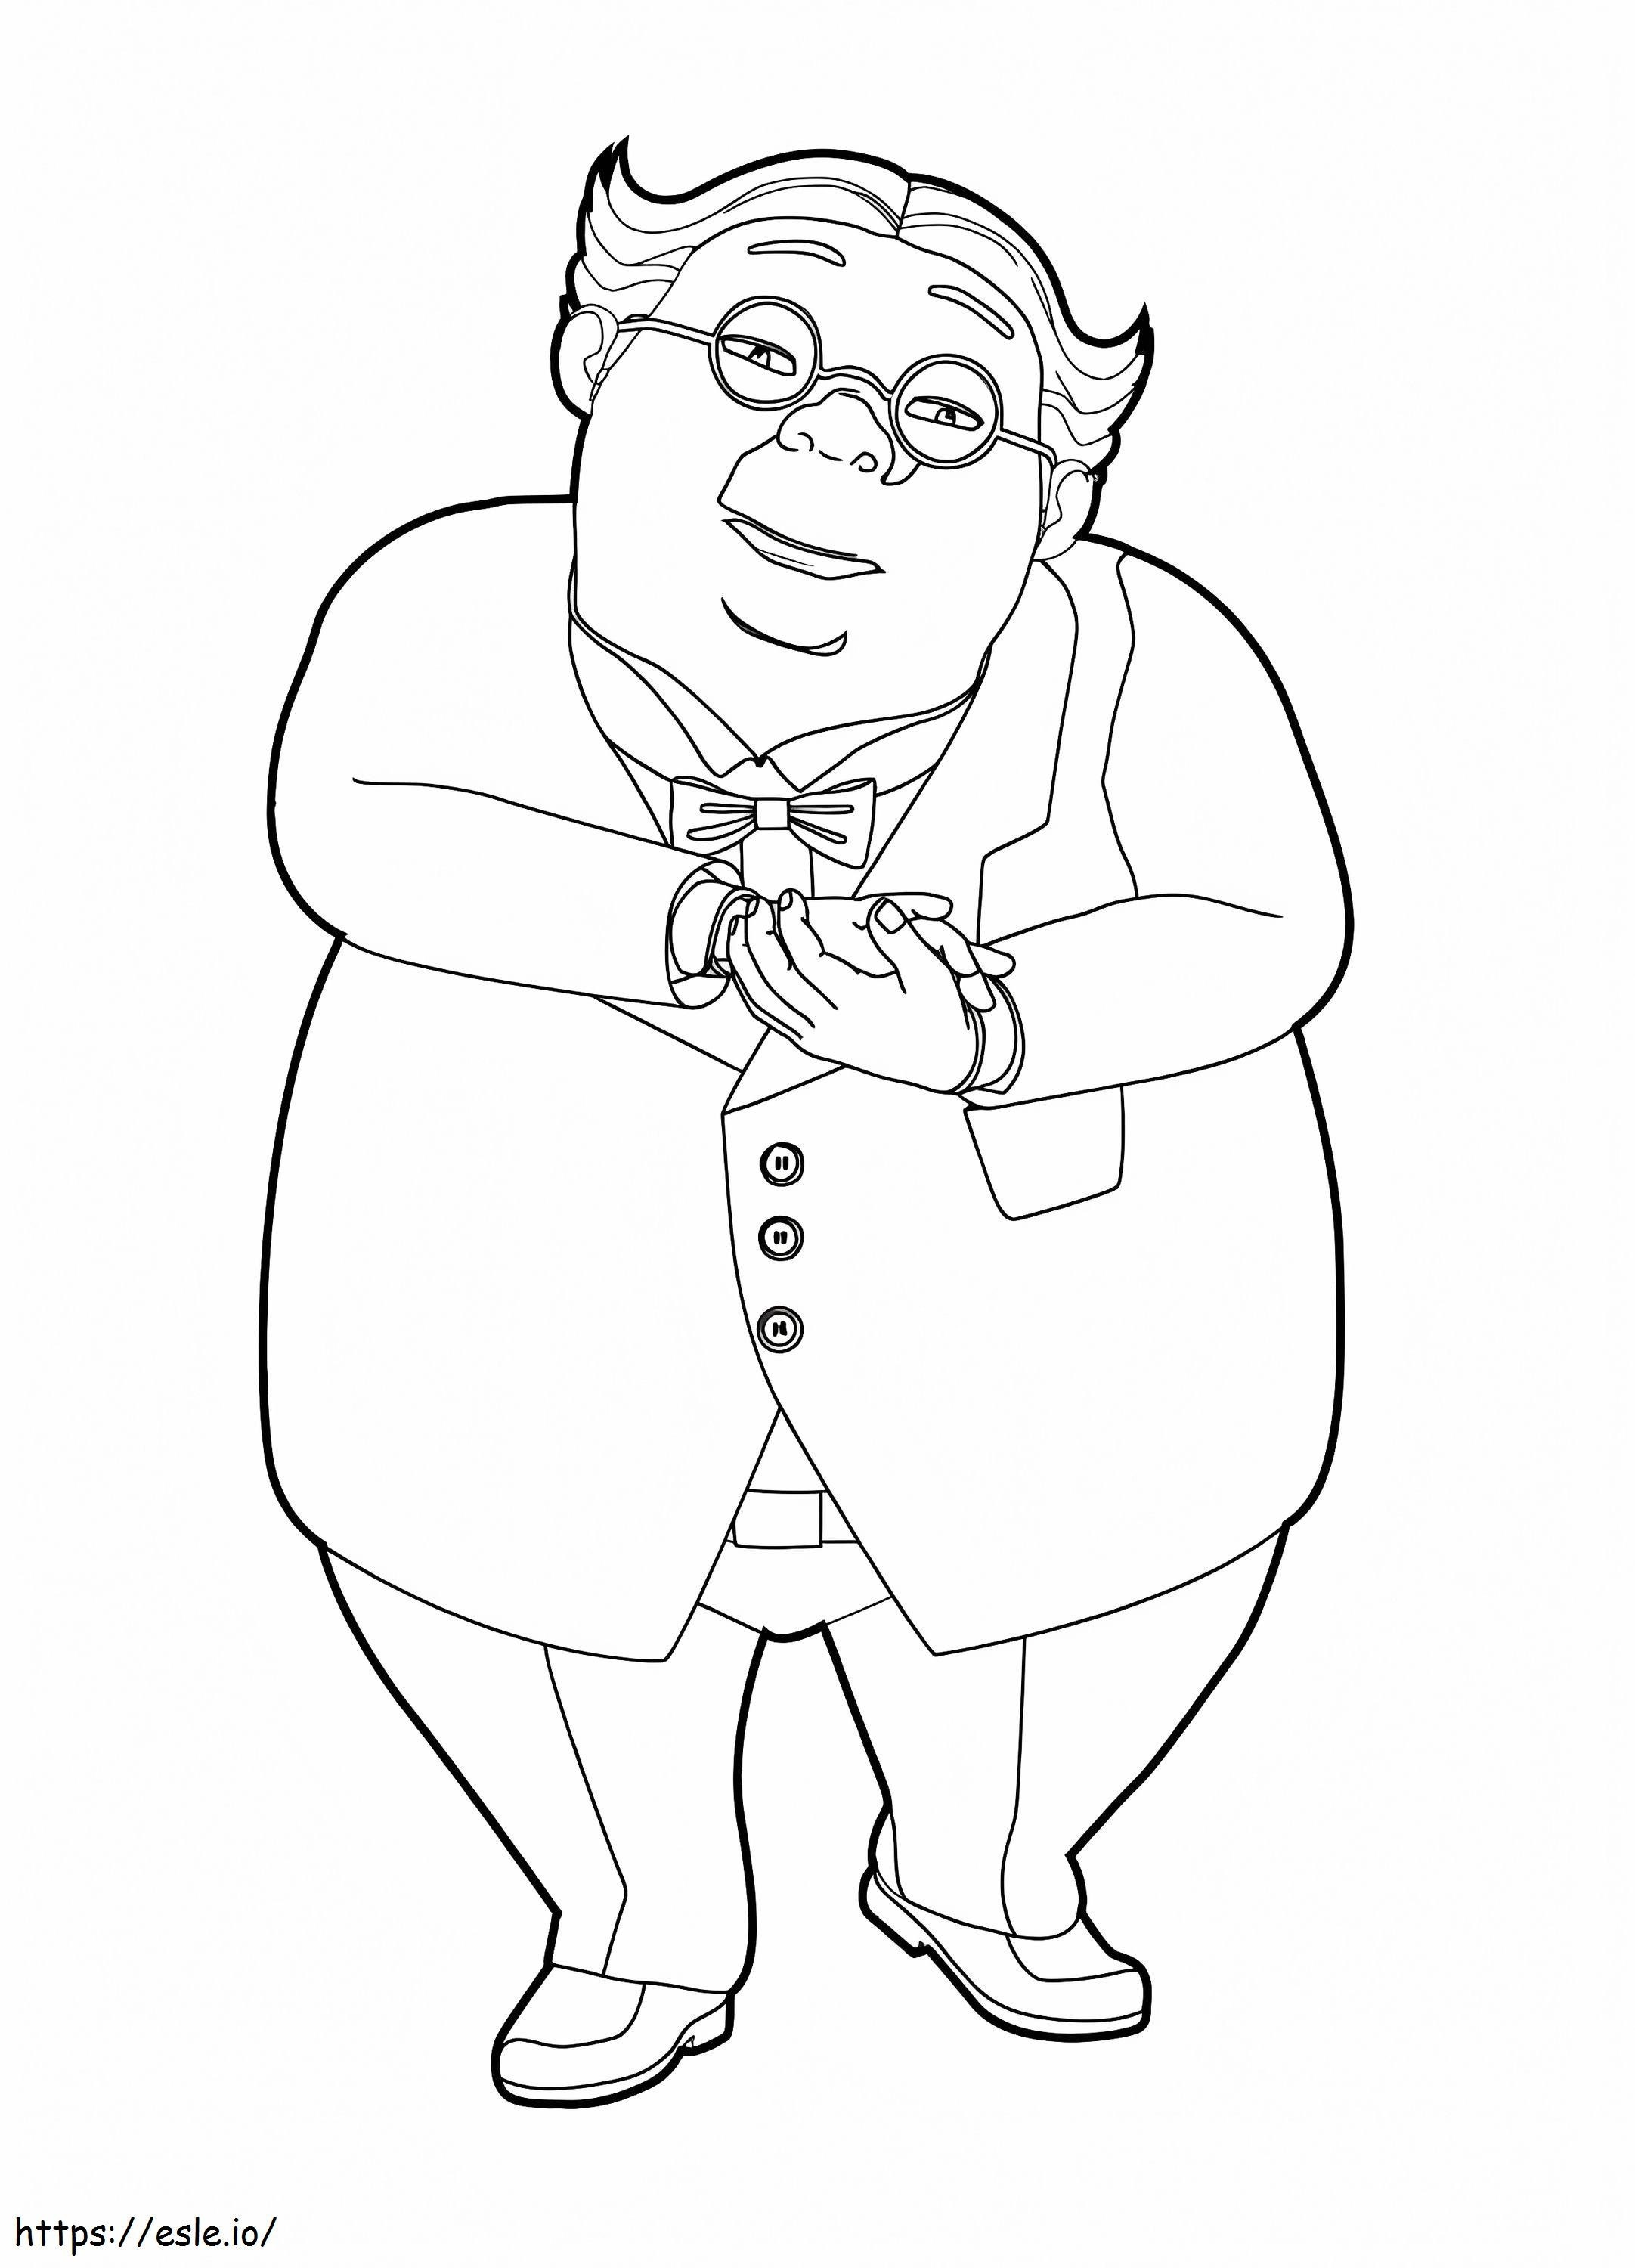 Character From Tobot coloring page